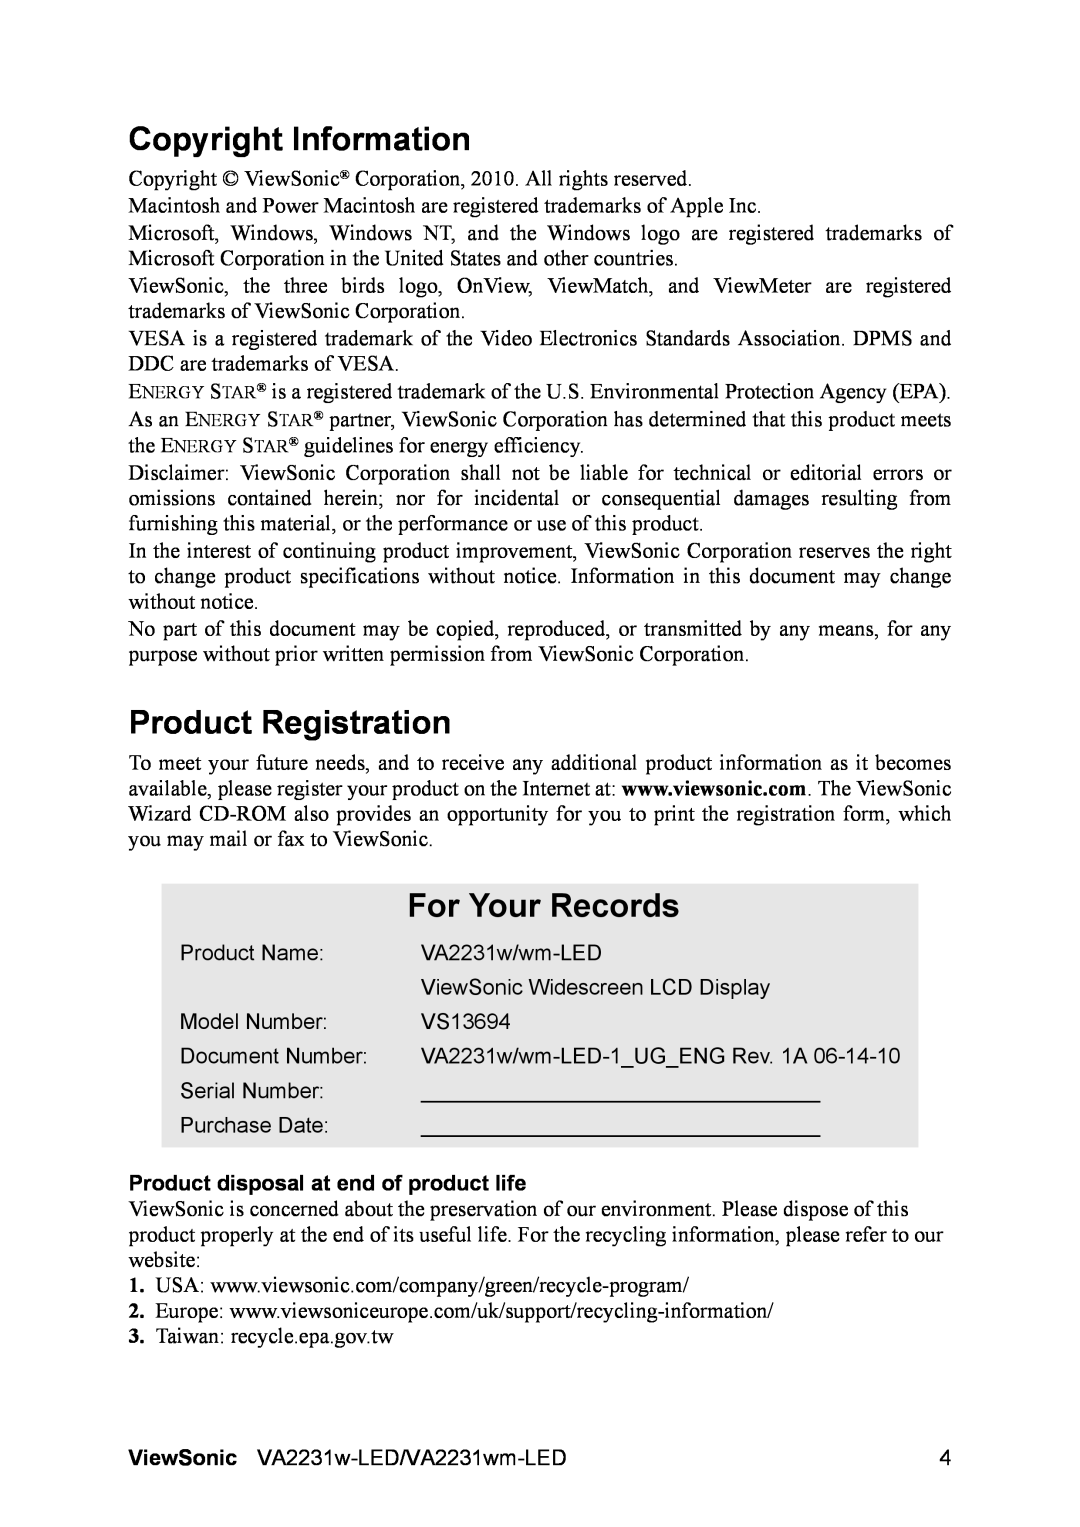 ViewSonic VA2231wm-LED, VA2231w-LED warranty Copyright Information, Product Registration, For Your Records 